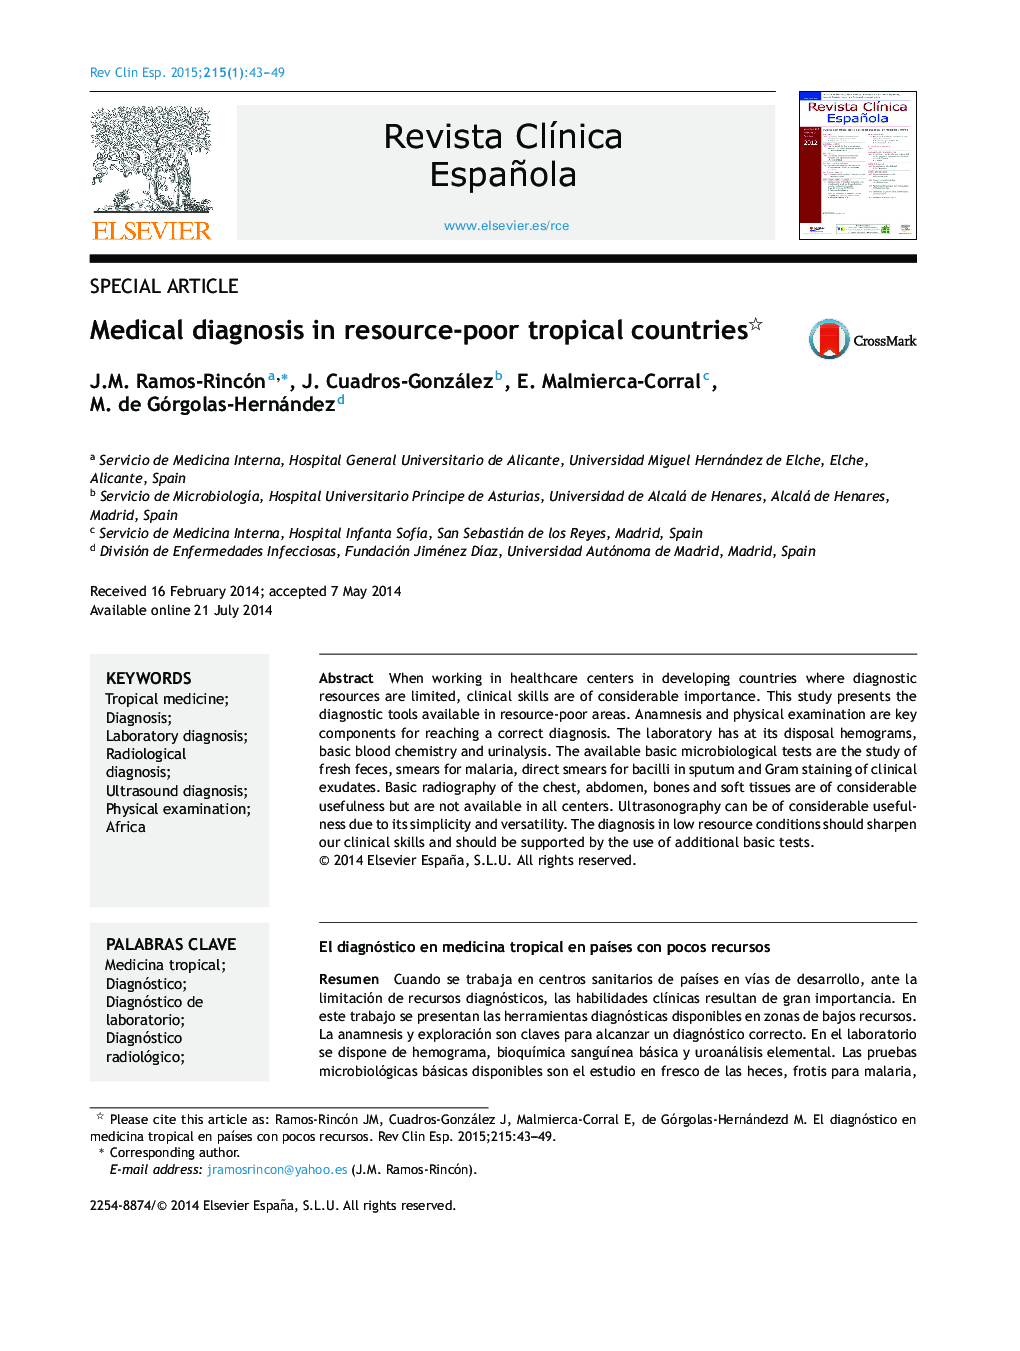 Medical diagnosis in resource-poor tropical countries 